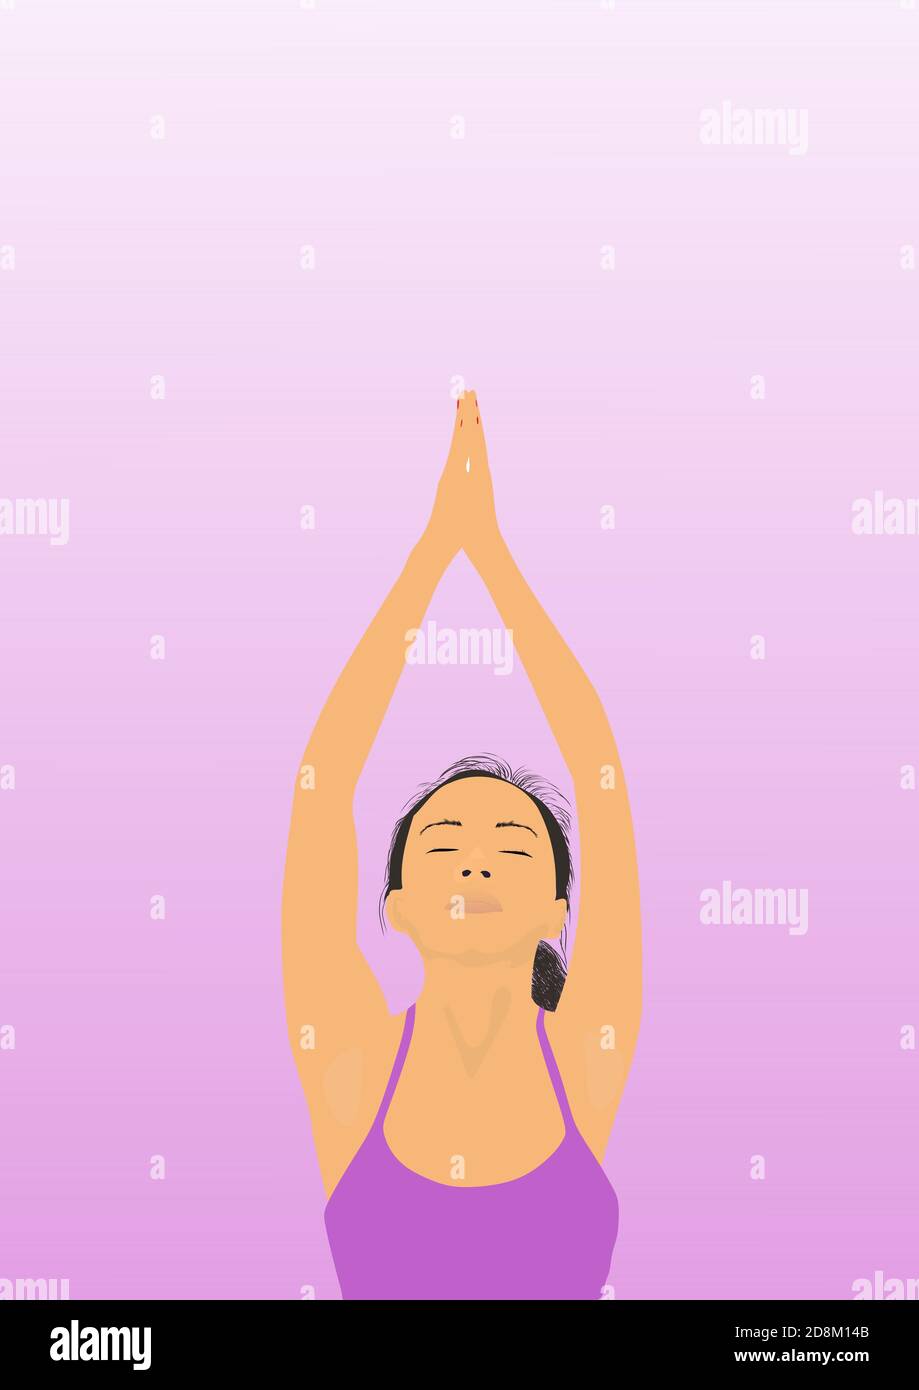 Woman in yoga positiong. Stock Photo